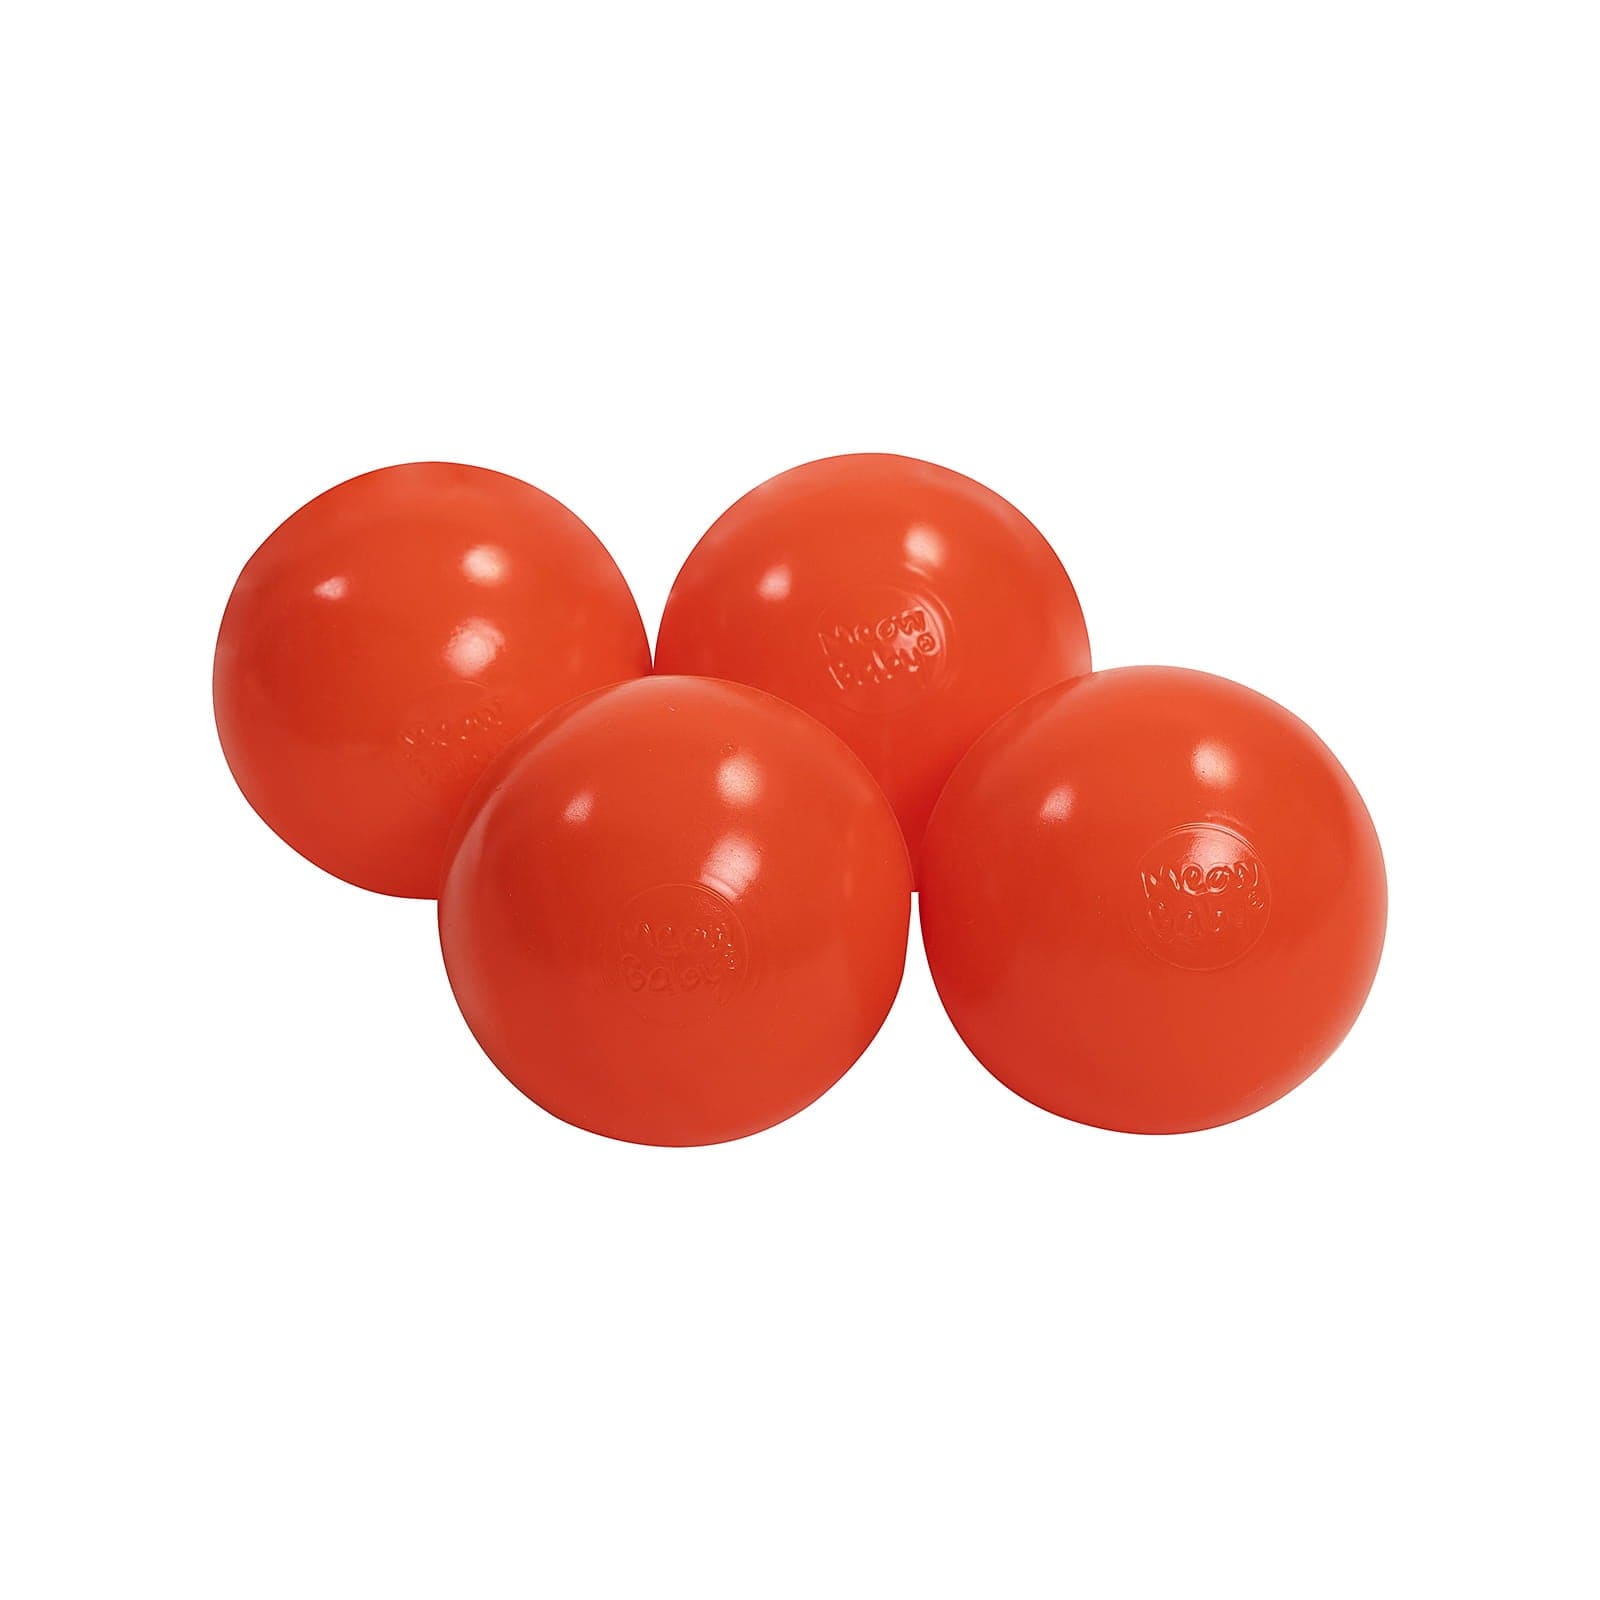 Soft CE Certified Plastic Balls For Kids By MeowBaby